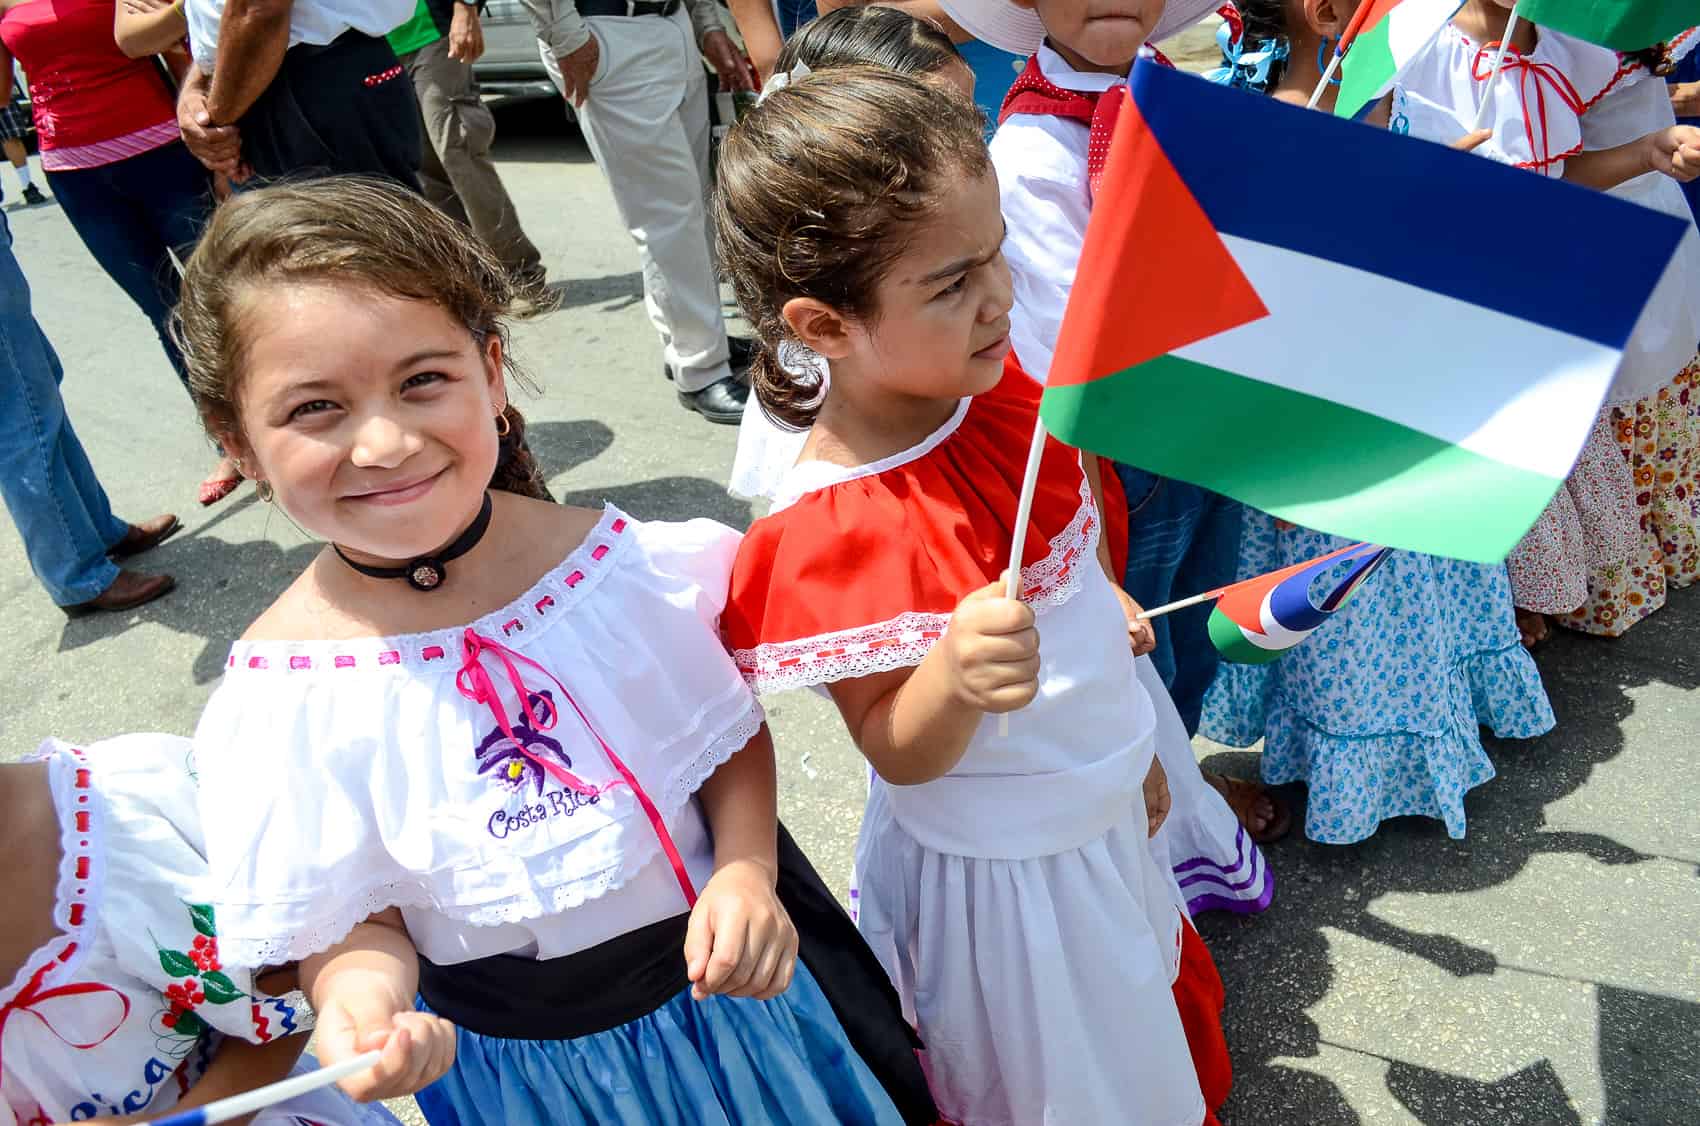 Children in traditional dress wave the Guanacaste flag at the 190th anniversary of the annexation of the Partido de Nicoya by Costa Rica, 2014.